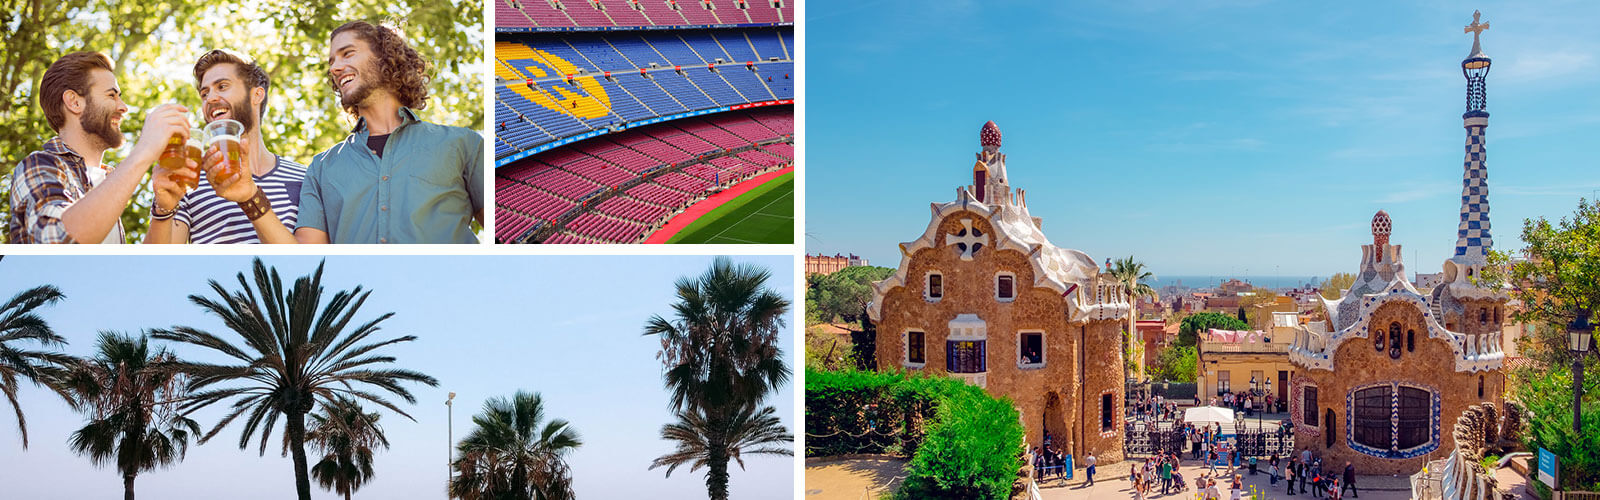 Barcelona stag do guide